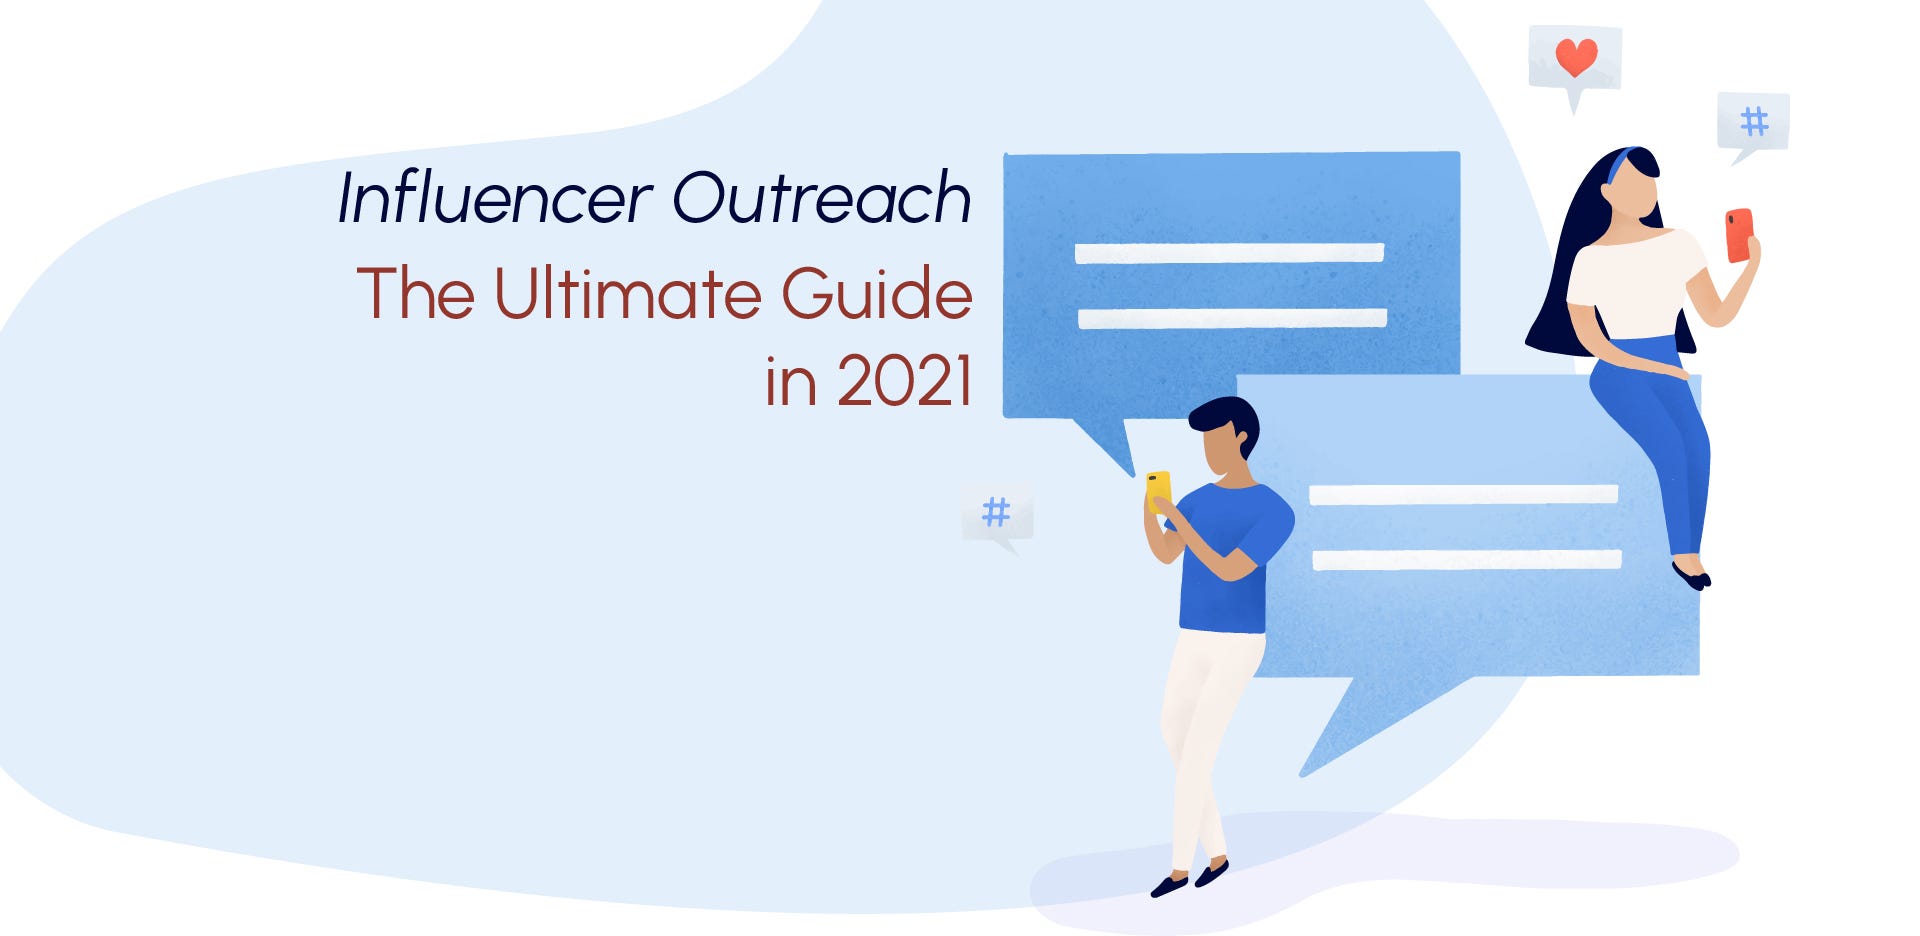 Influencer Outreach: The Ultimate Guide in 2021